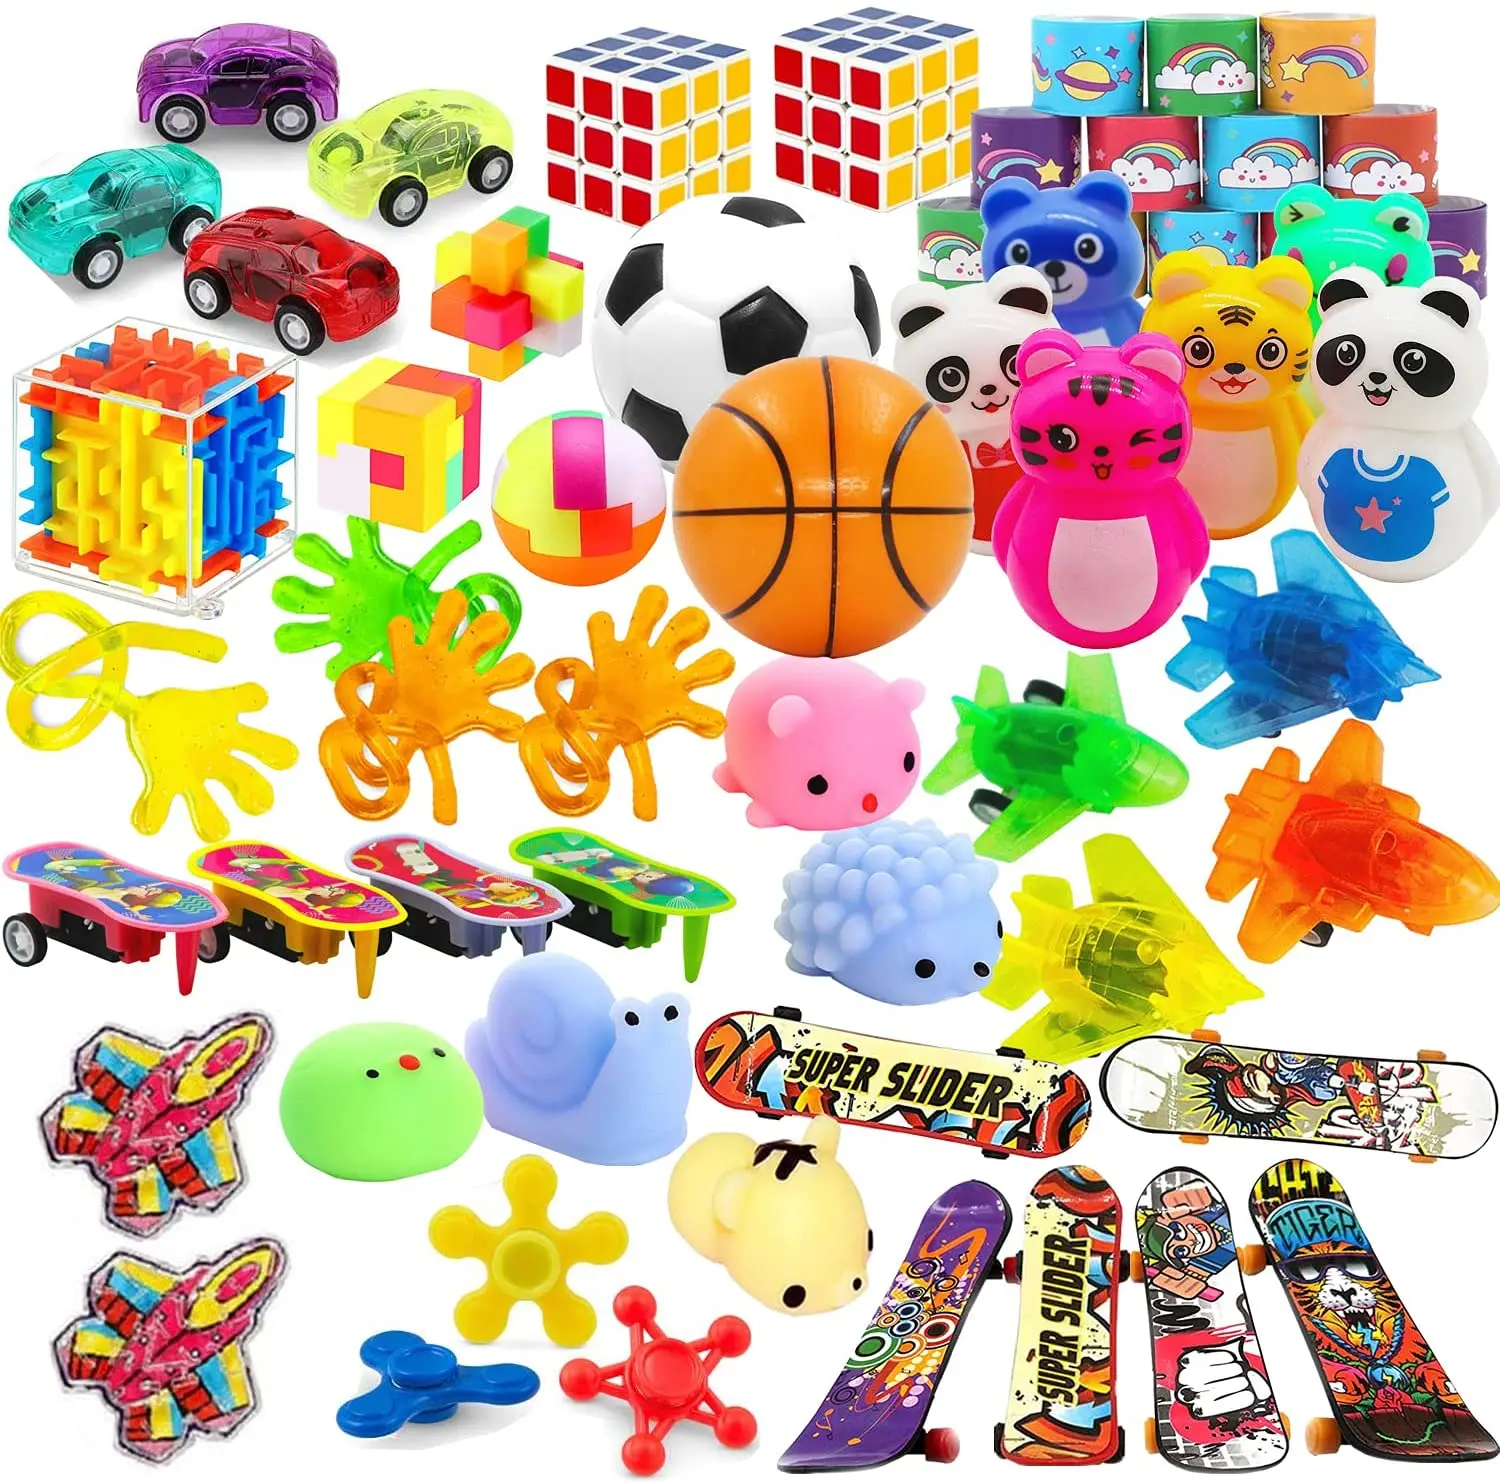 

52 Pack Party Favors Toy for Kids Birthday Bag Fillers Stocking Stuffer Carnival Prizes Treasure Box Toys Pinata Stuffers Goodie